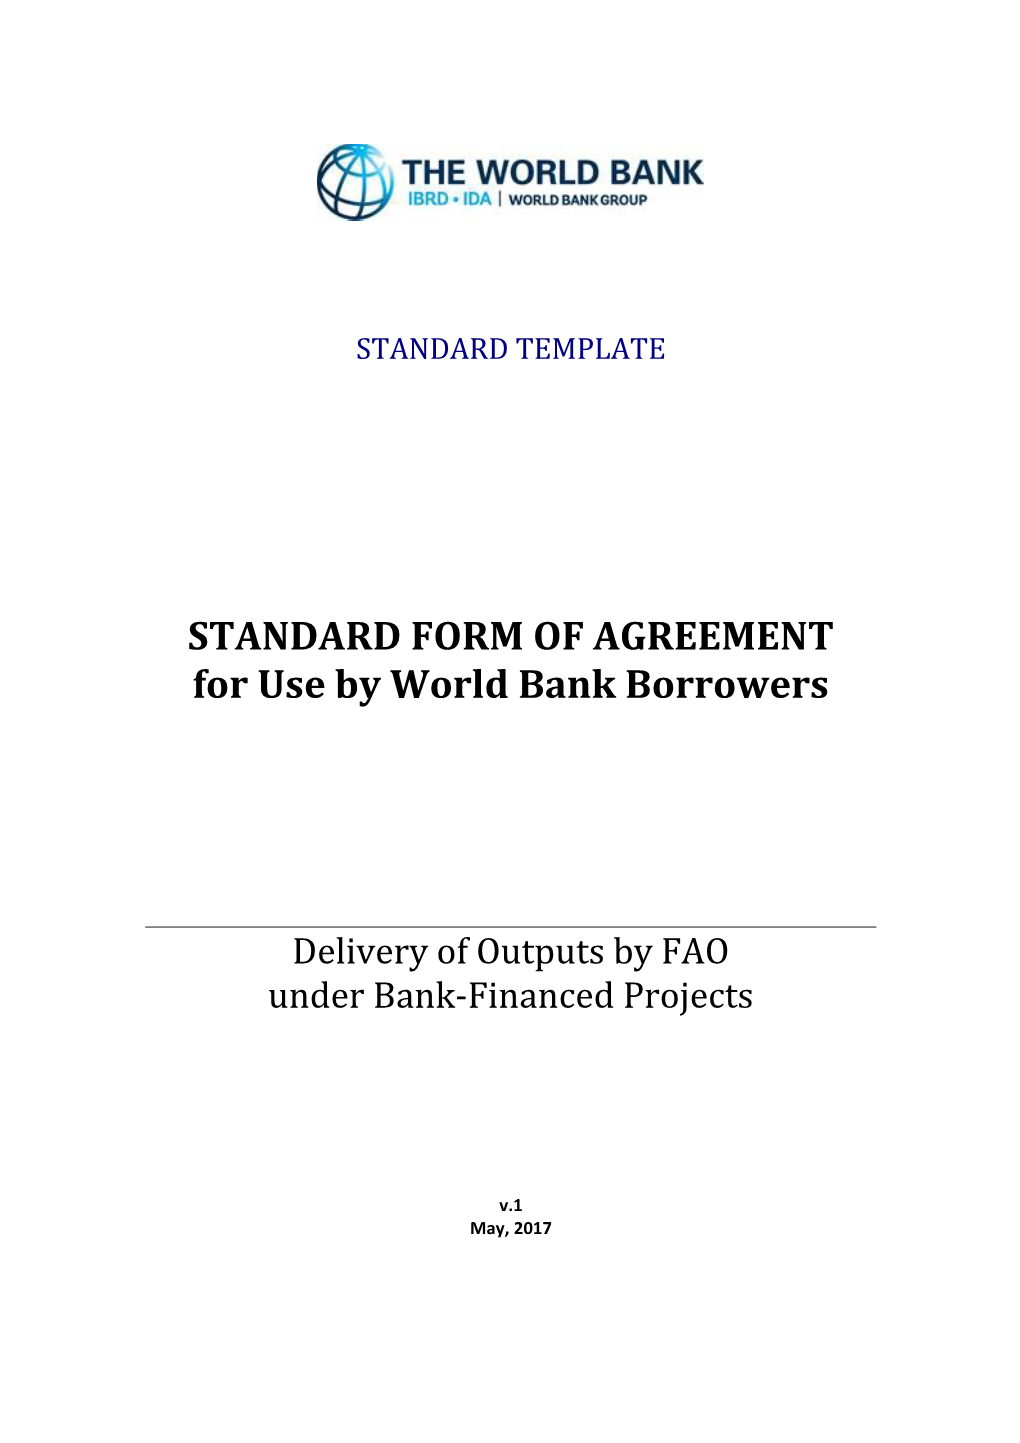 STANDARD FORM of AGREEMENT for Use by World Bank Borrowers